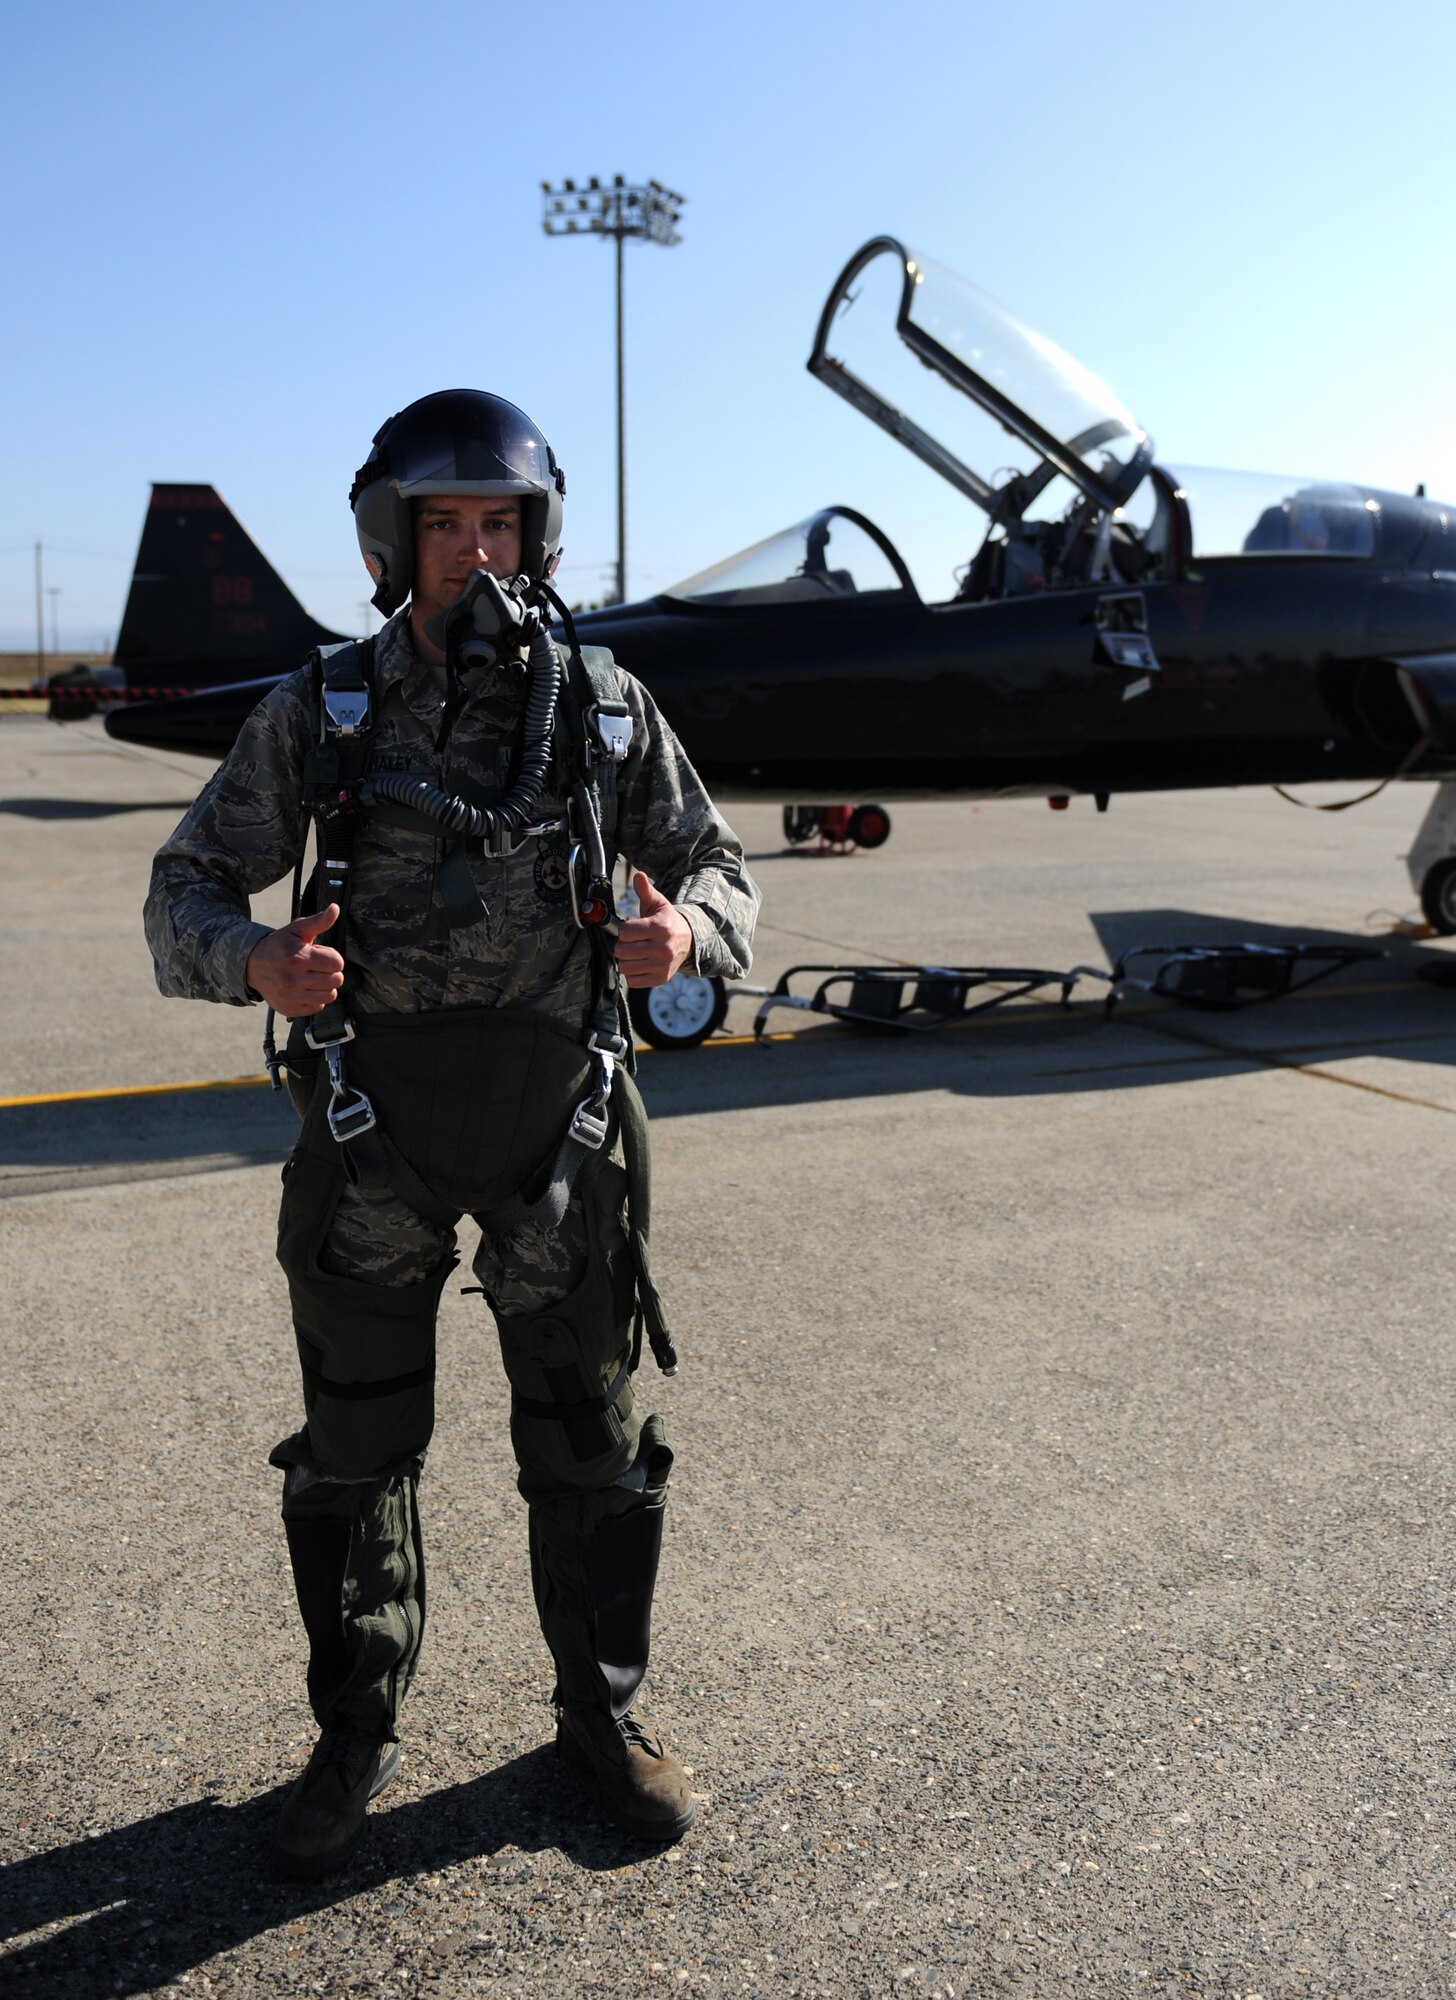 Airman 1st Class Eric Whaley, 9th Civil Engineer Squadron firefighter, poses in front of a T-38 Talon jet trainer on the flight-line at Beale Air Force Base, Calif., Feb. 13, 2013. Whaley portrayed a pilot during a fire department exercise. (U.S. Air Force photo by Staff Sgt. Robert M. Trujillo/Released)